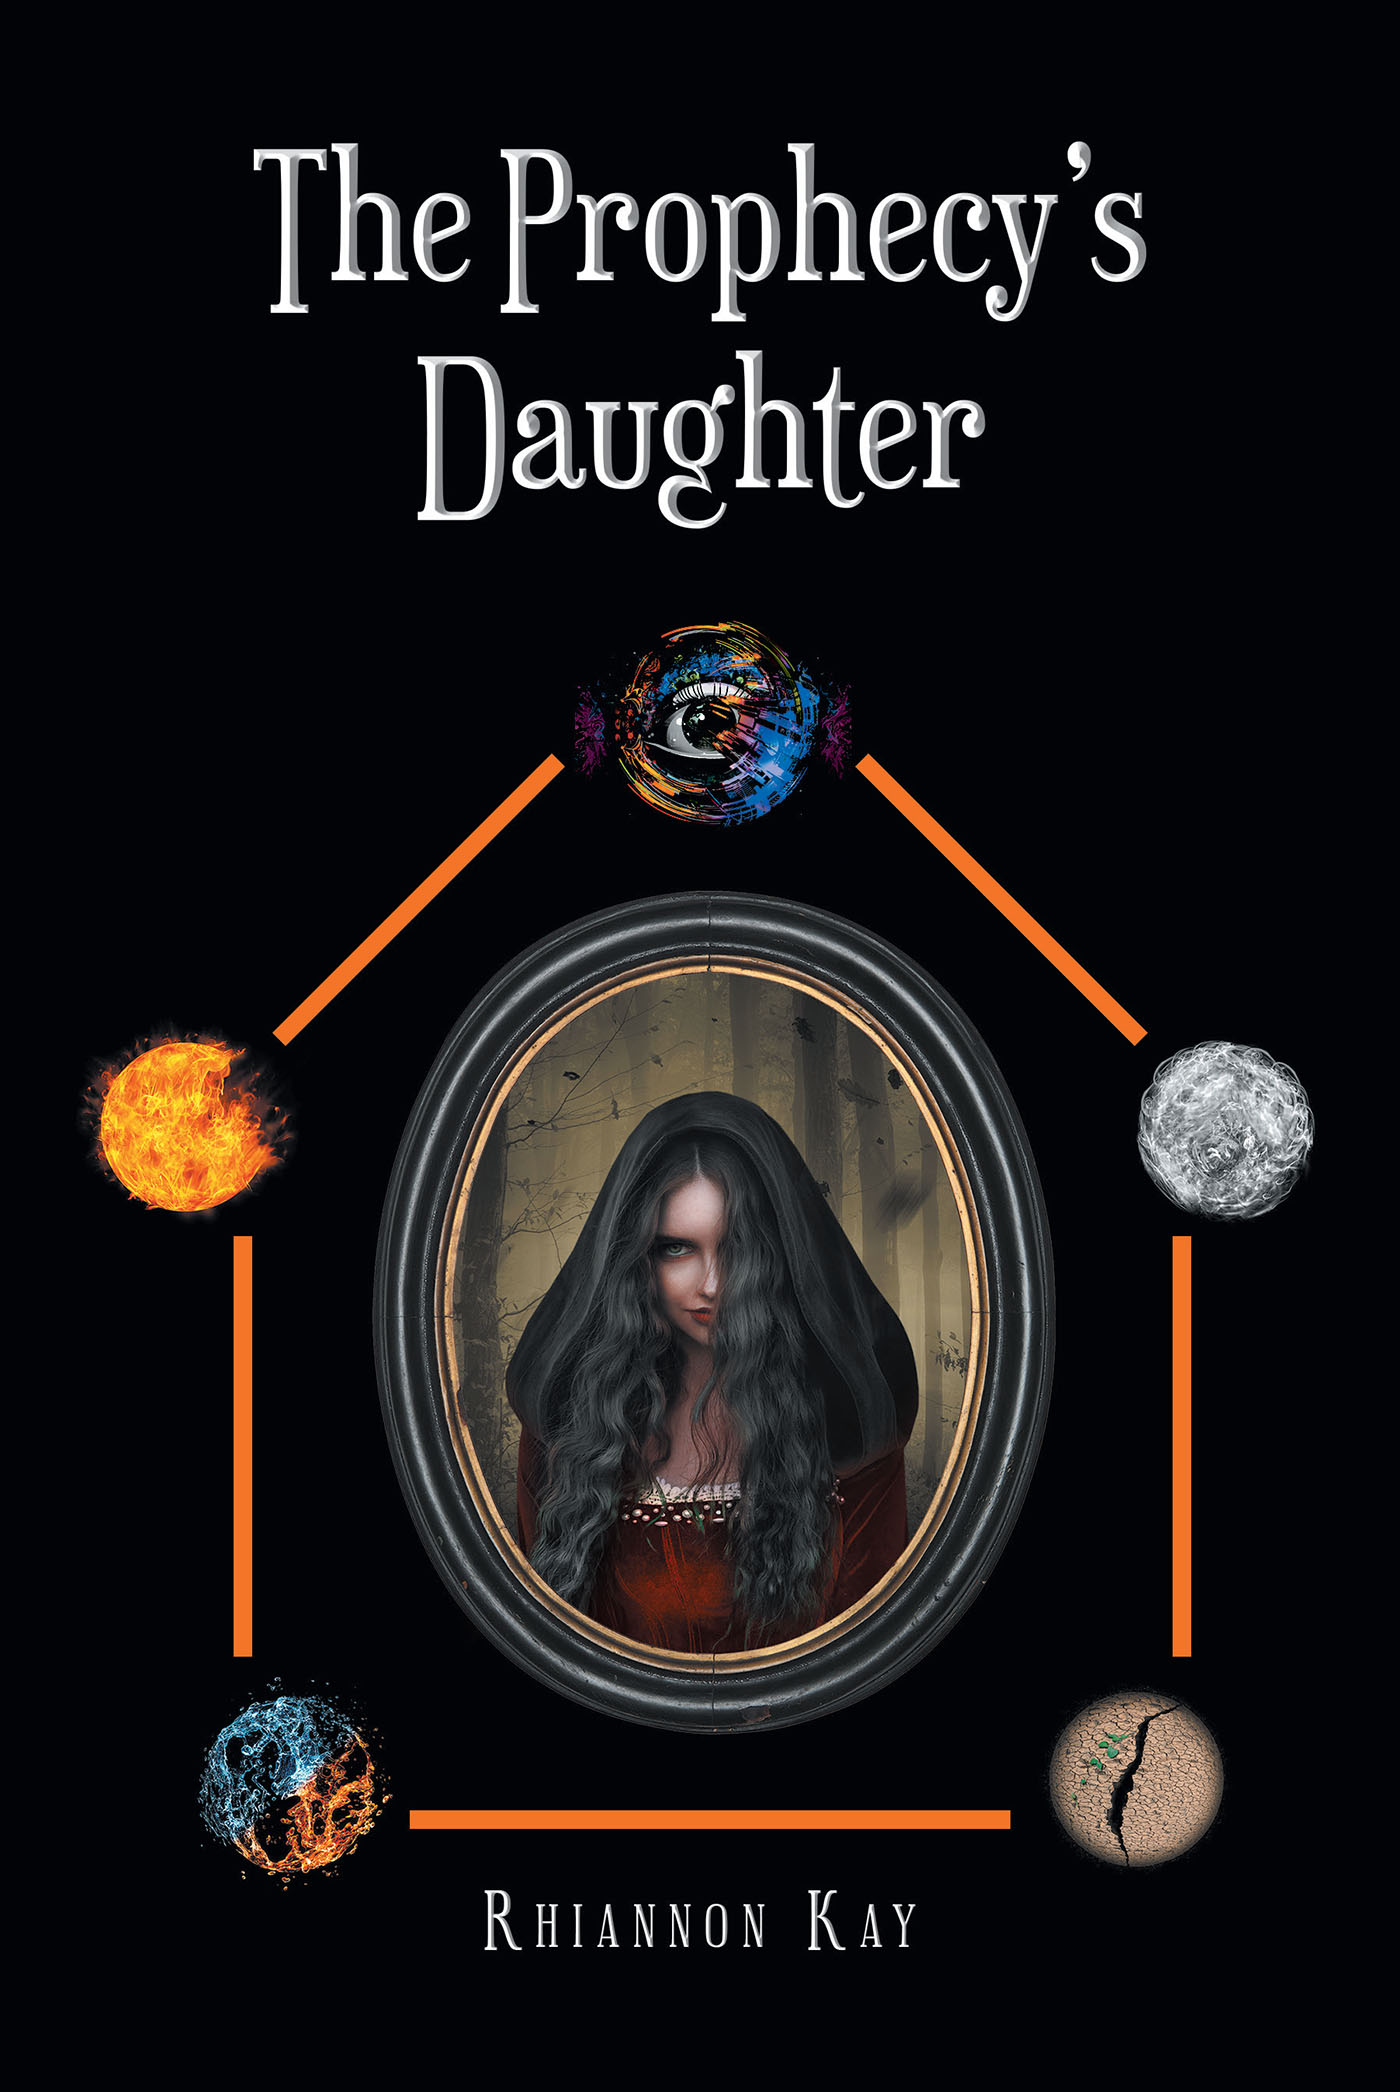 Rhiannon Kay’s New Book, "The Prophecy's Daughter," Follows a Witch Who Must Learn to Master Her Powers in Order to Save Her World from Utter Destruction